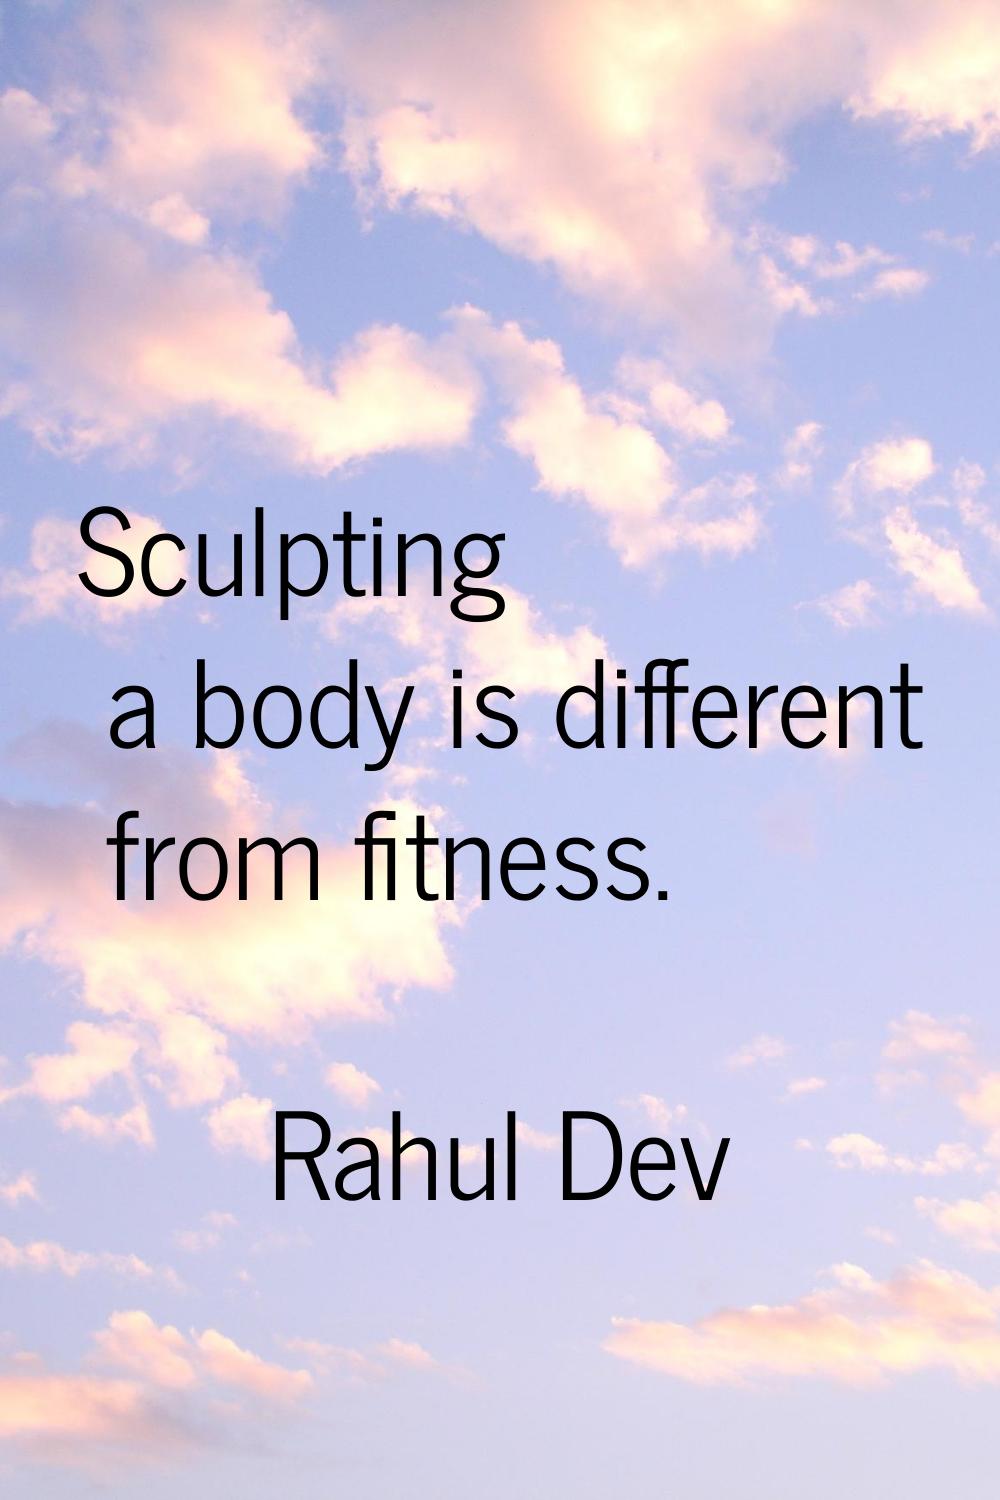 Sculpting a body is different from fitness.